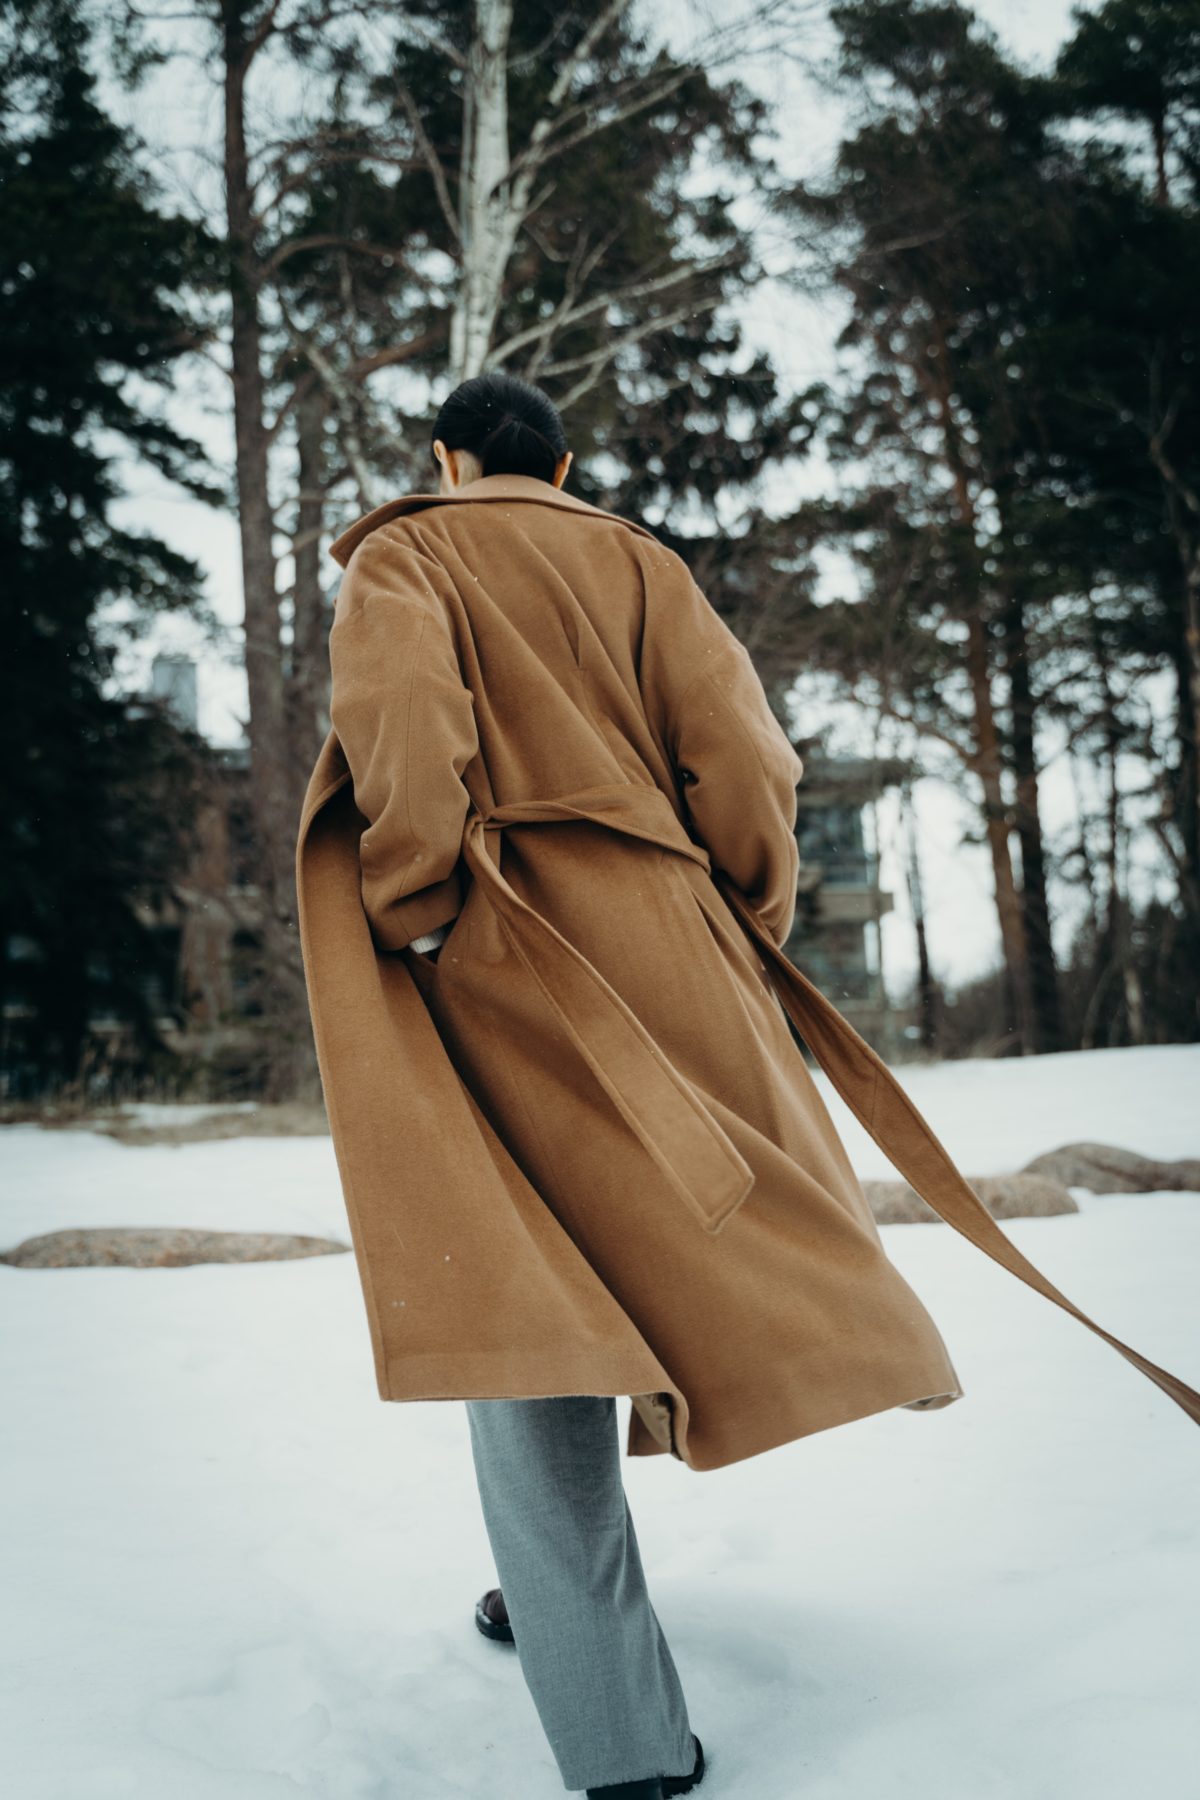 Person wearing a formal winter coat and walking away from the camera.